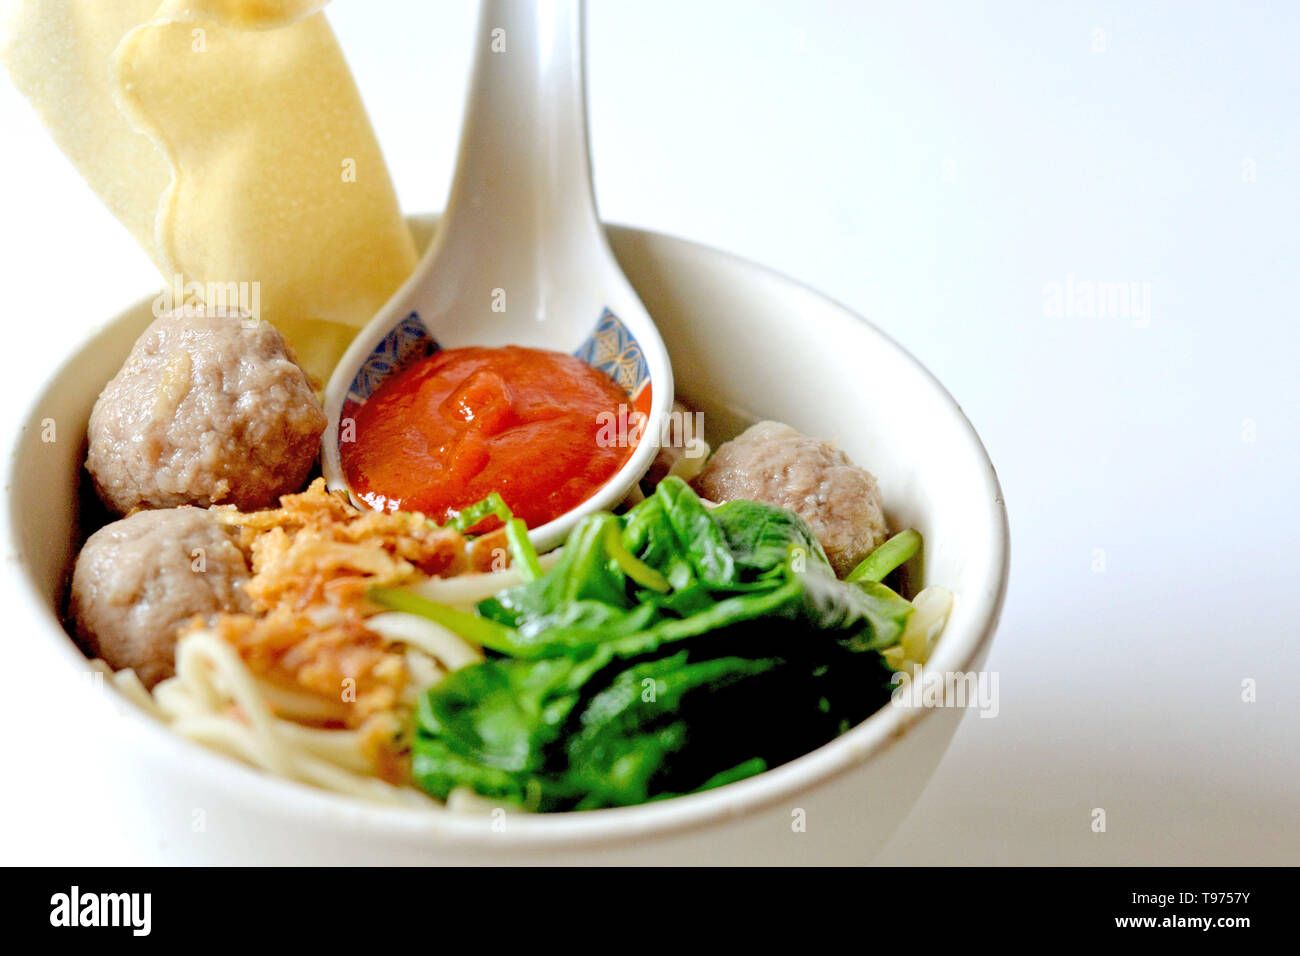 Indonesian Food Meat Ball Soup Beef Ball Baso Bakso Mie Ayam Chicken Noodle Stock Photo